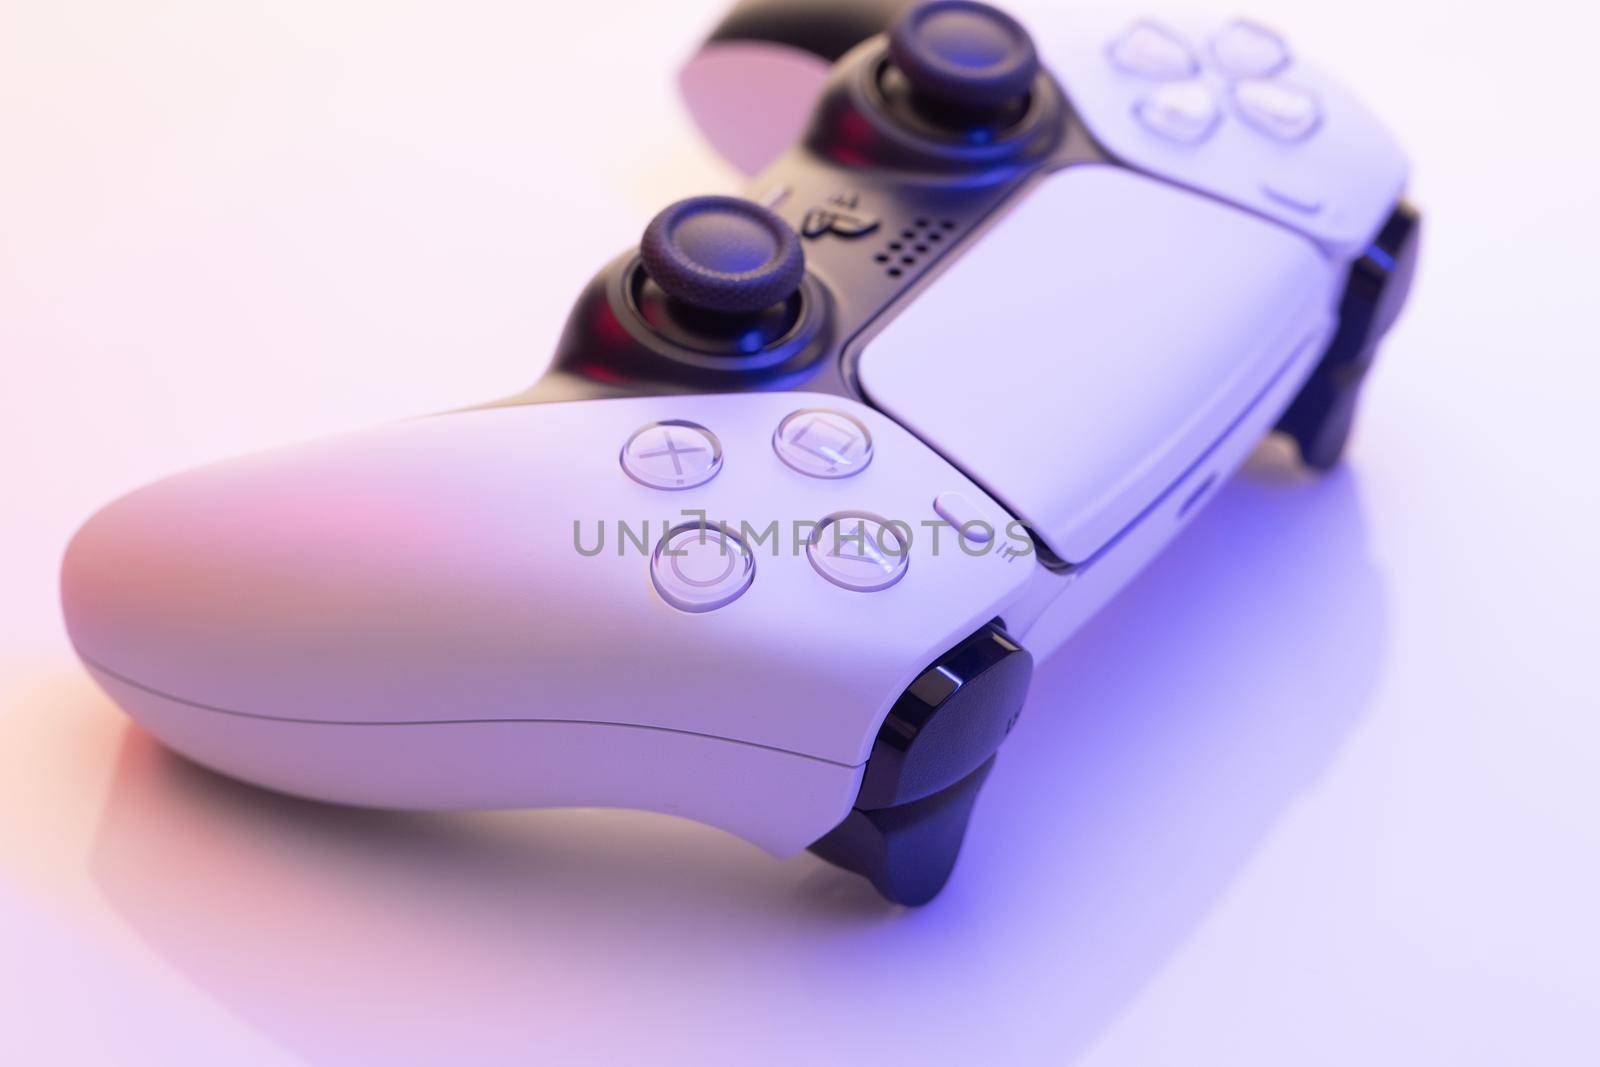 NEW YORK - March 3, 2021: Sony Playstation 5 controller. Close up parts of joystick from new Sony PlayStation 5 set-top box. White controller from TV game box in blue light by uflypro